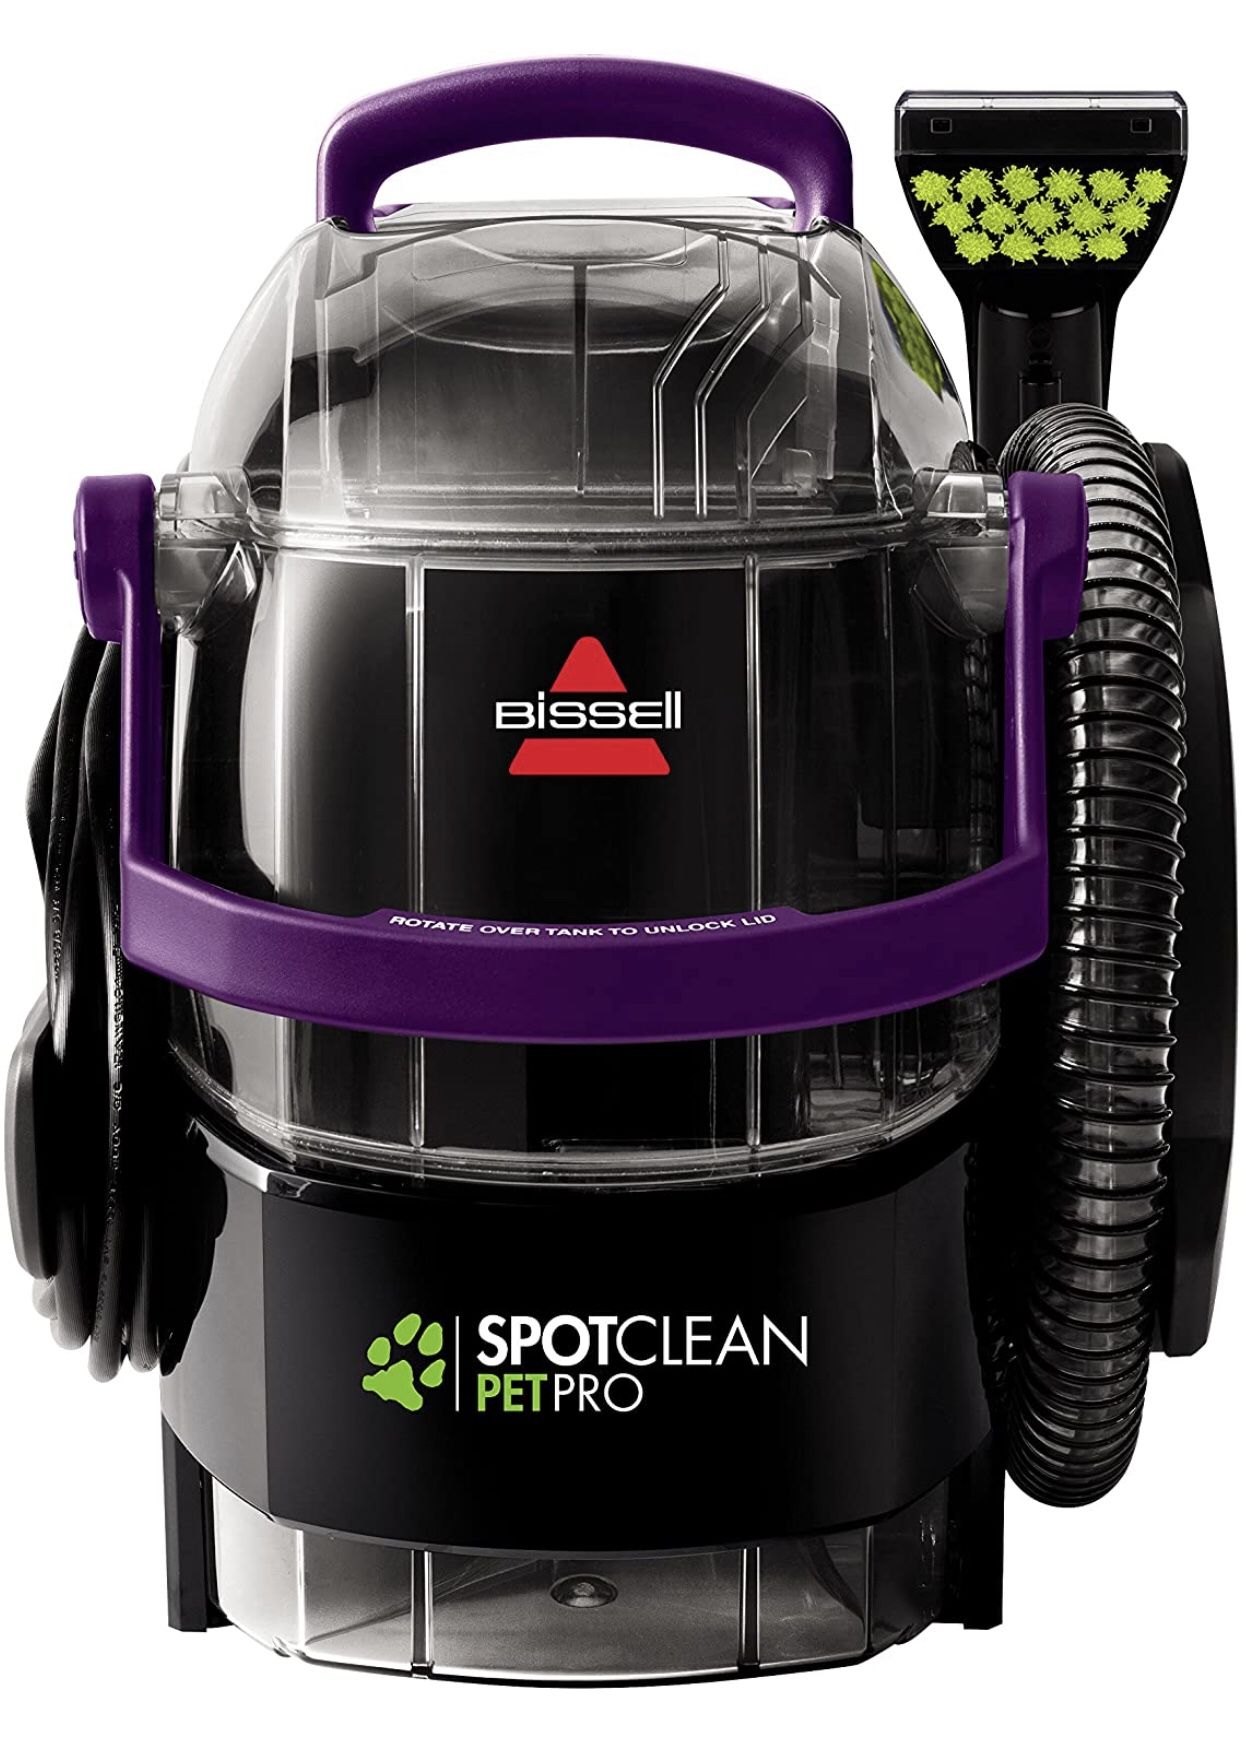 NEW! BISSELL SpotClean Pet Pro Portable Carpet Cleaner, 2458